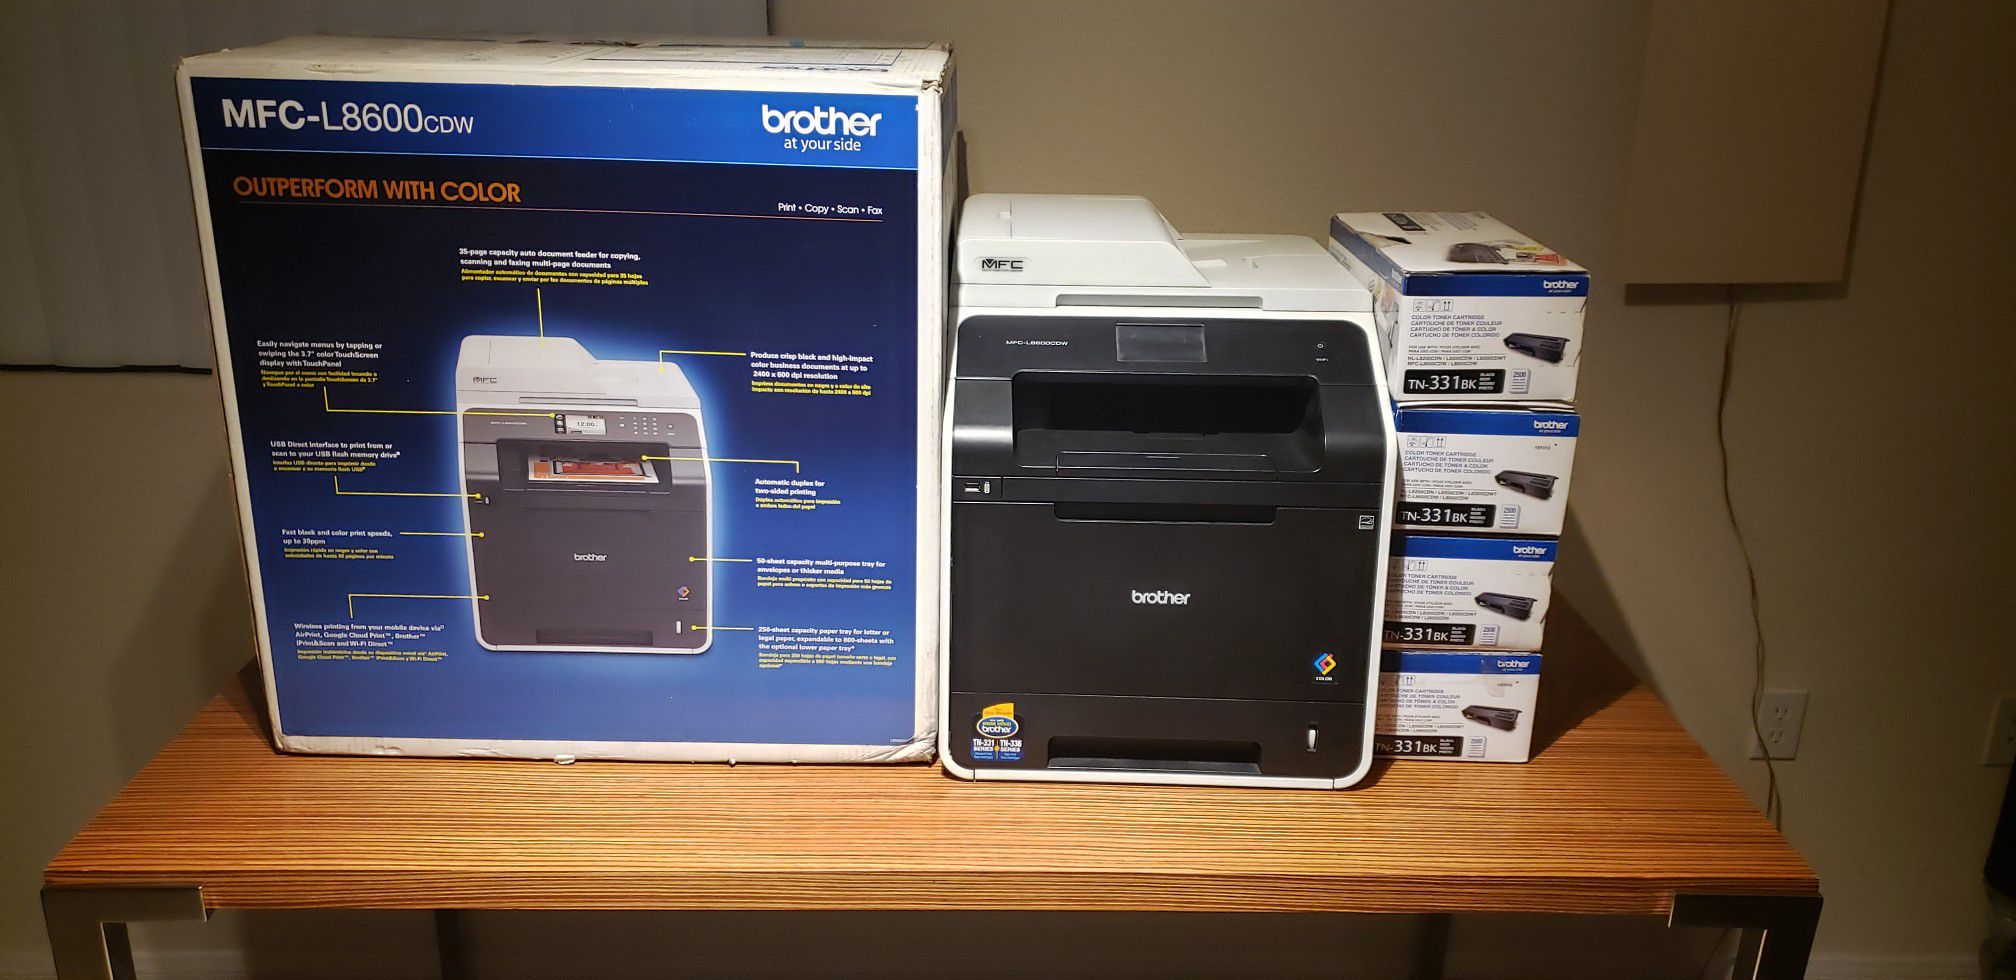 5 Black ink cartridges and Brother MFC-L8600cdw